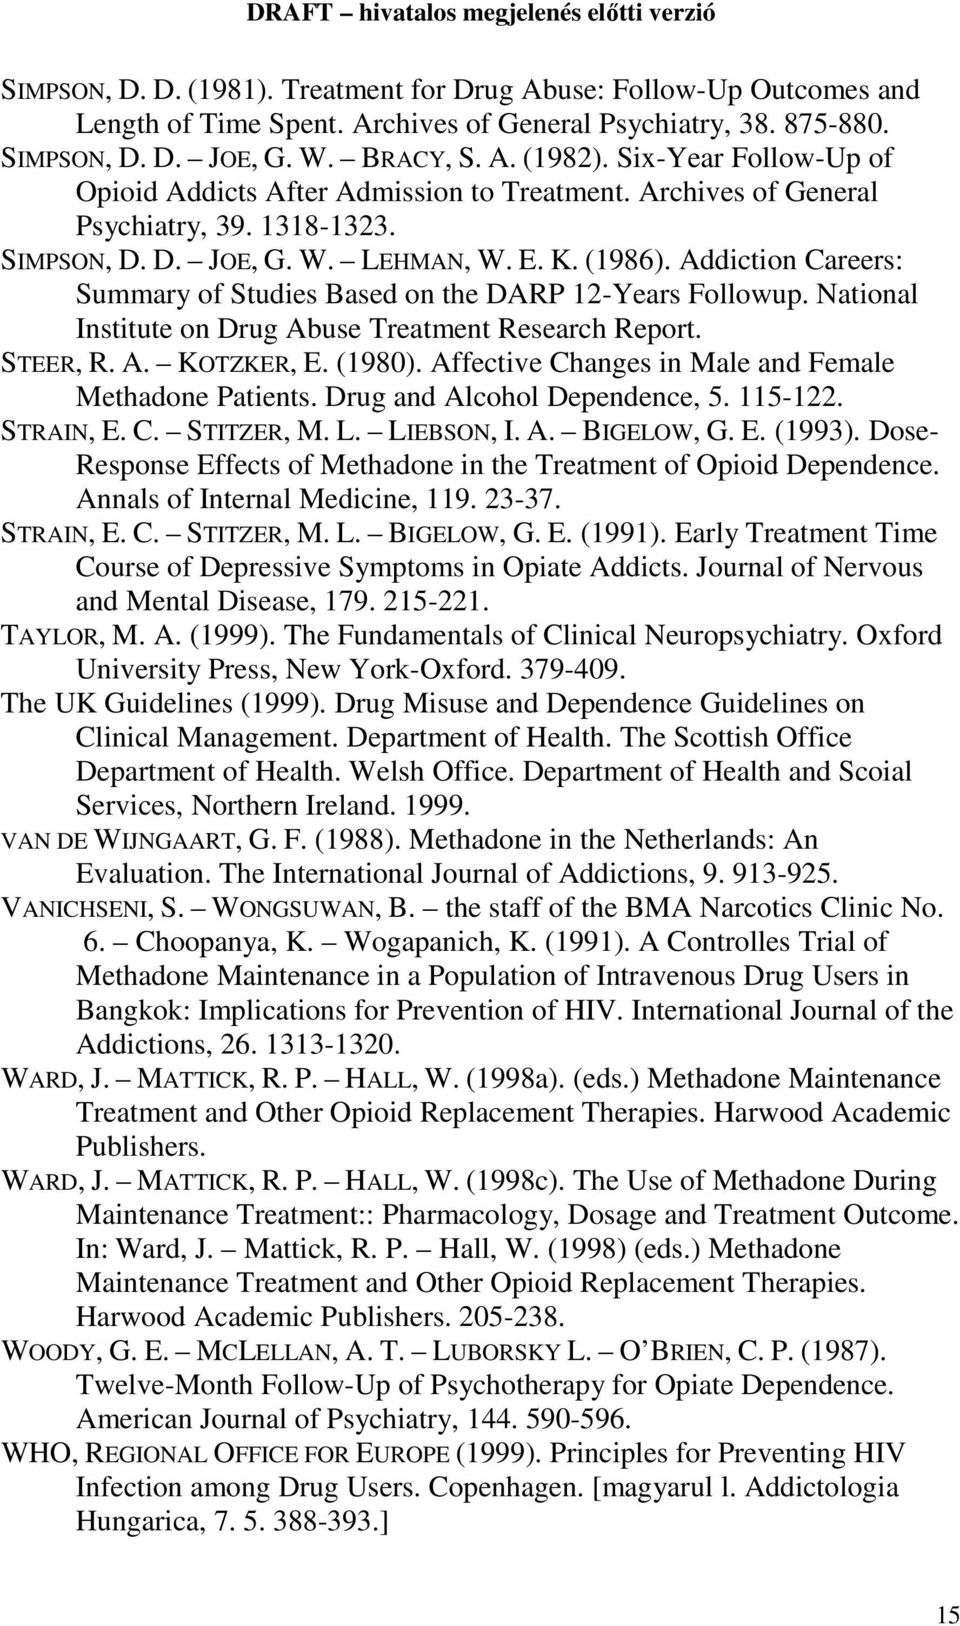 Addiction Careers: Summary of Studies Based on the DARP 12-Years Followup. National Institute on Drug Abuse Treatment Research Report. STEER, R. A. KOTZKER, E. (1980).